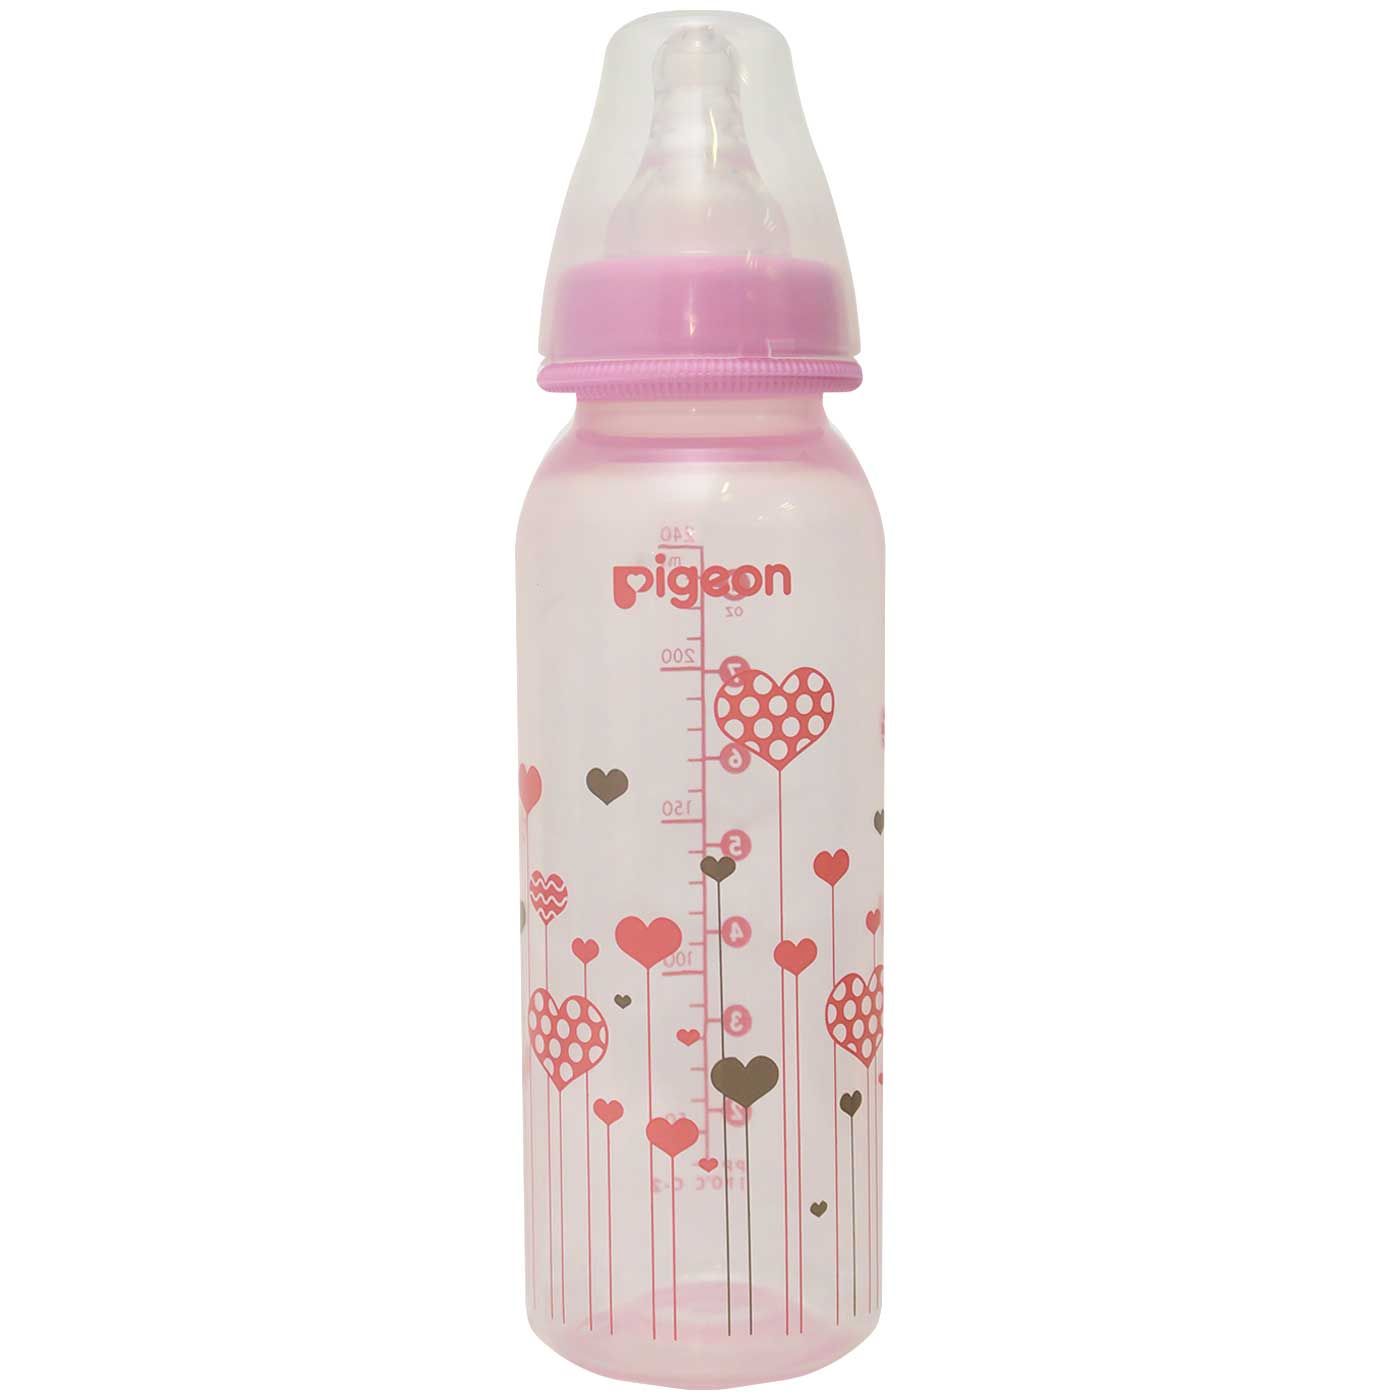 Pigeon Botol PP Clear 240 ml Pink - 1